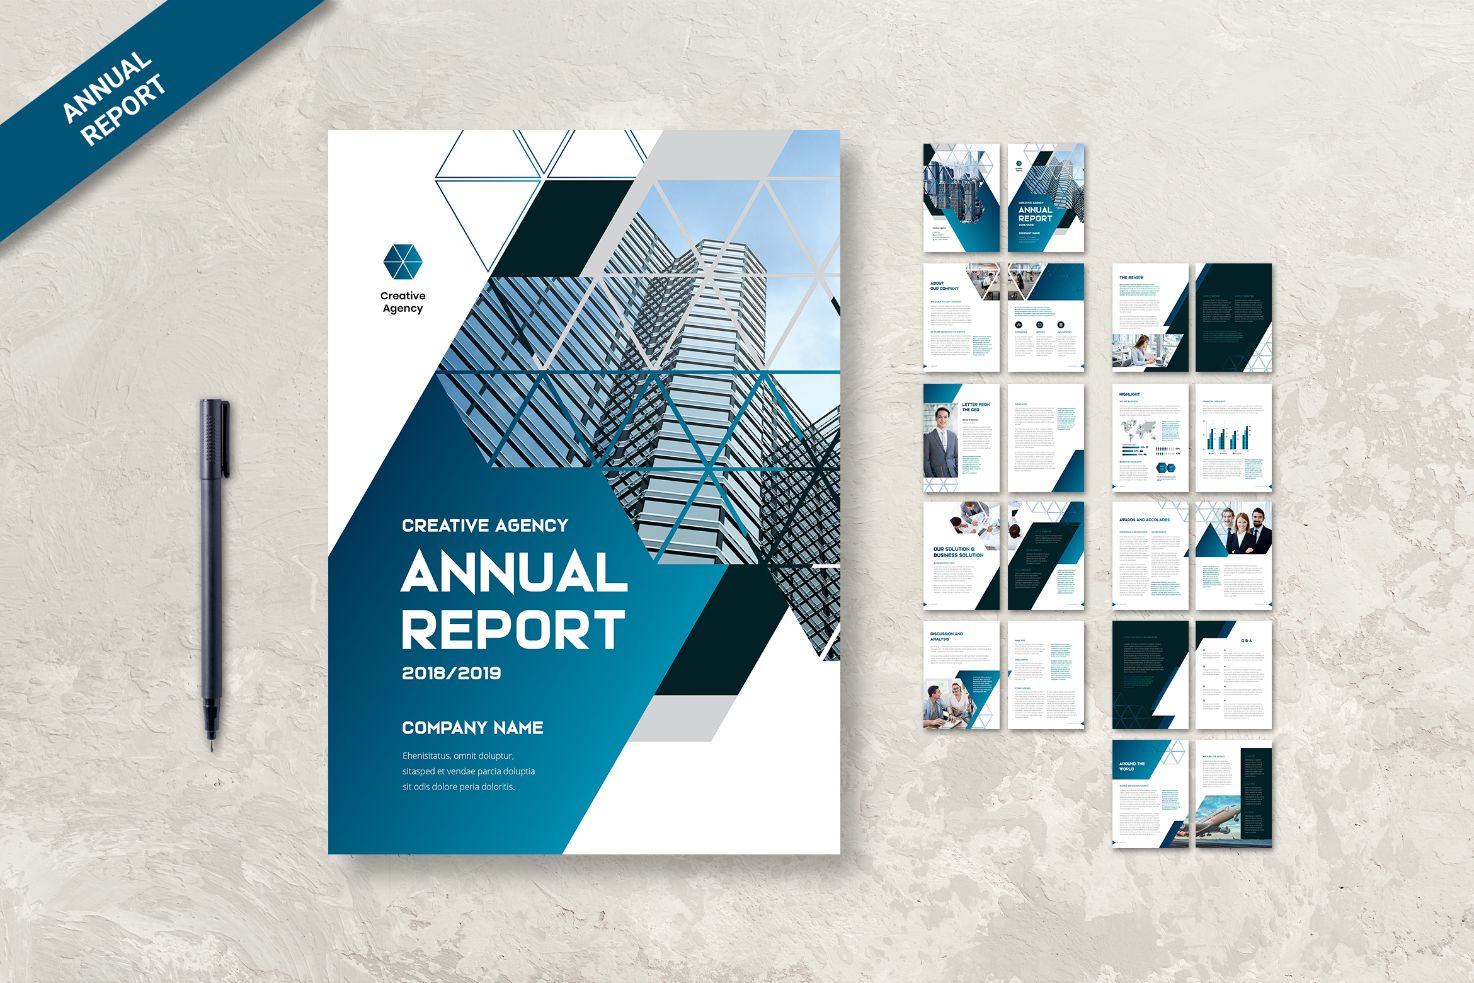 Best Annual Report Template Designs - Blue and White Geometric Design Template